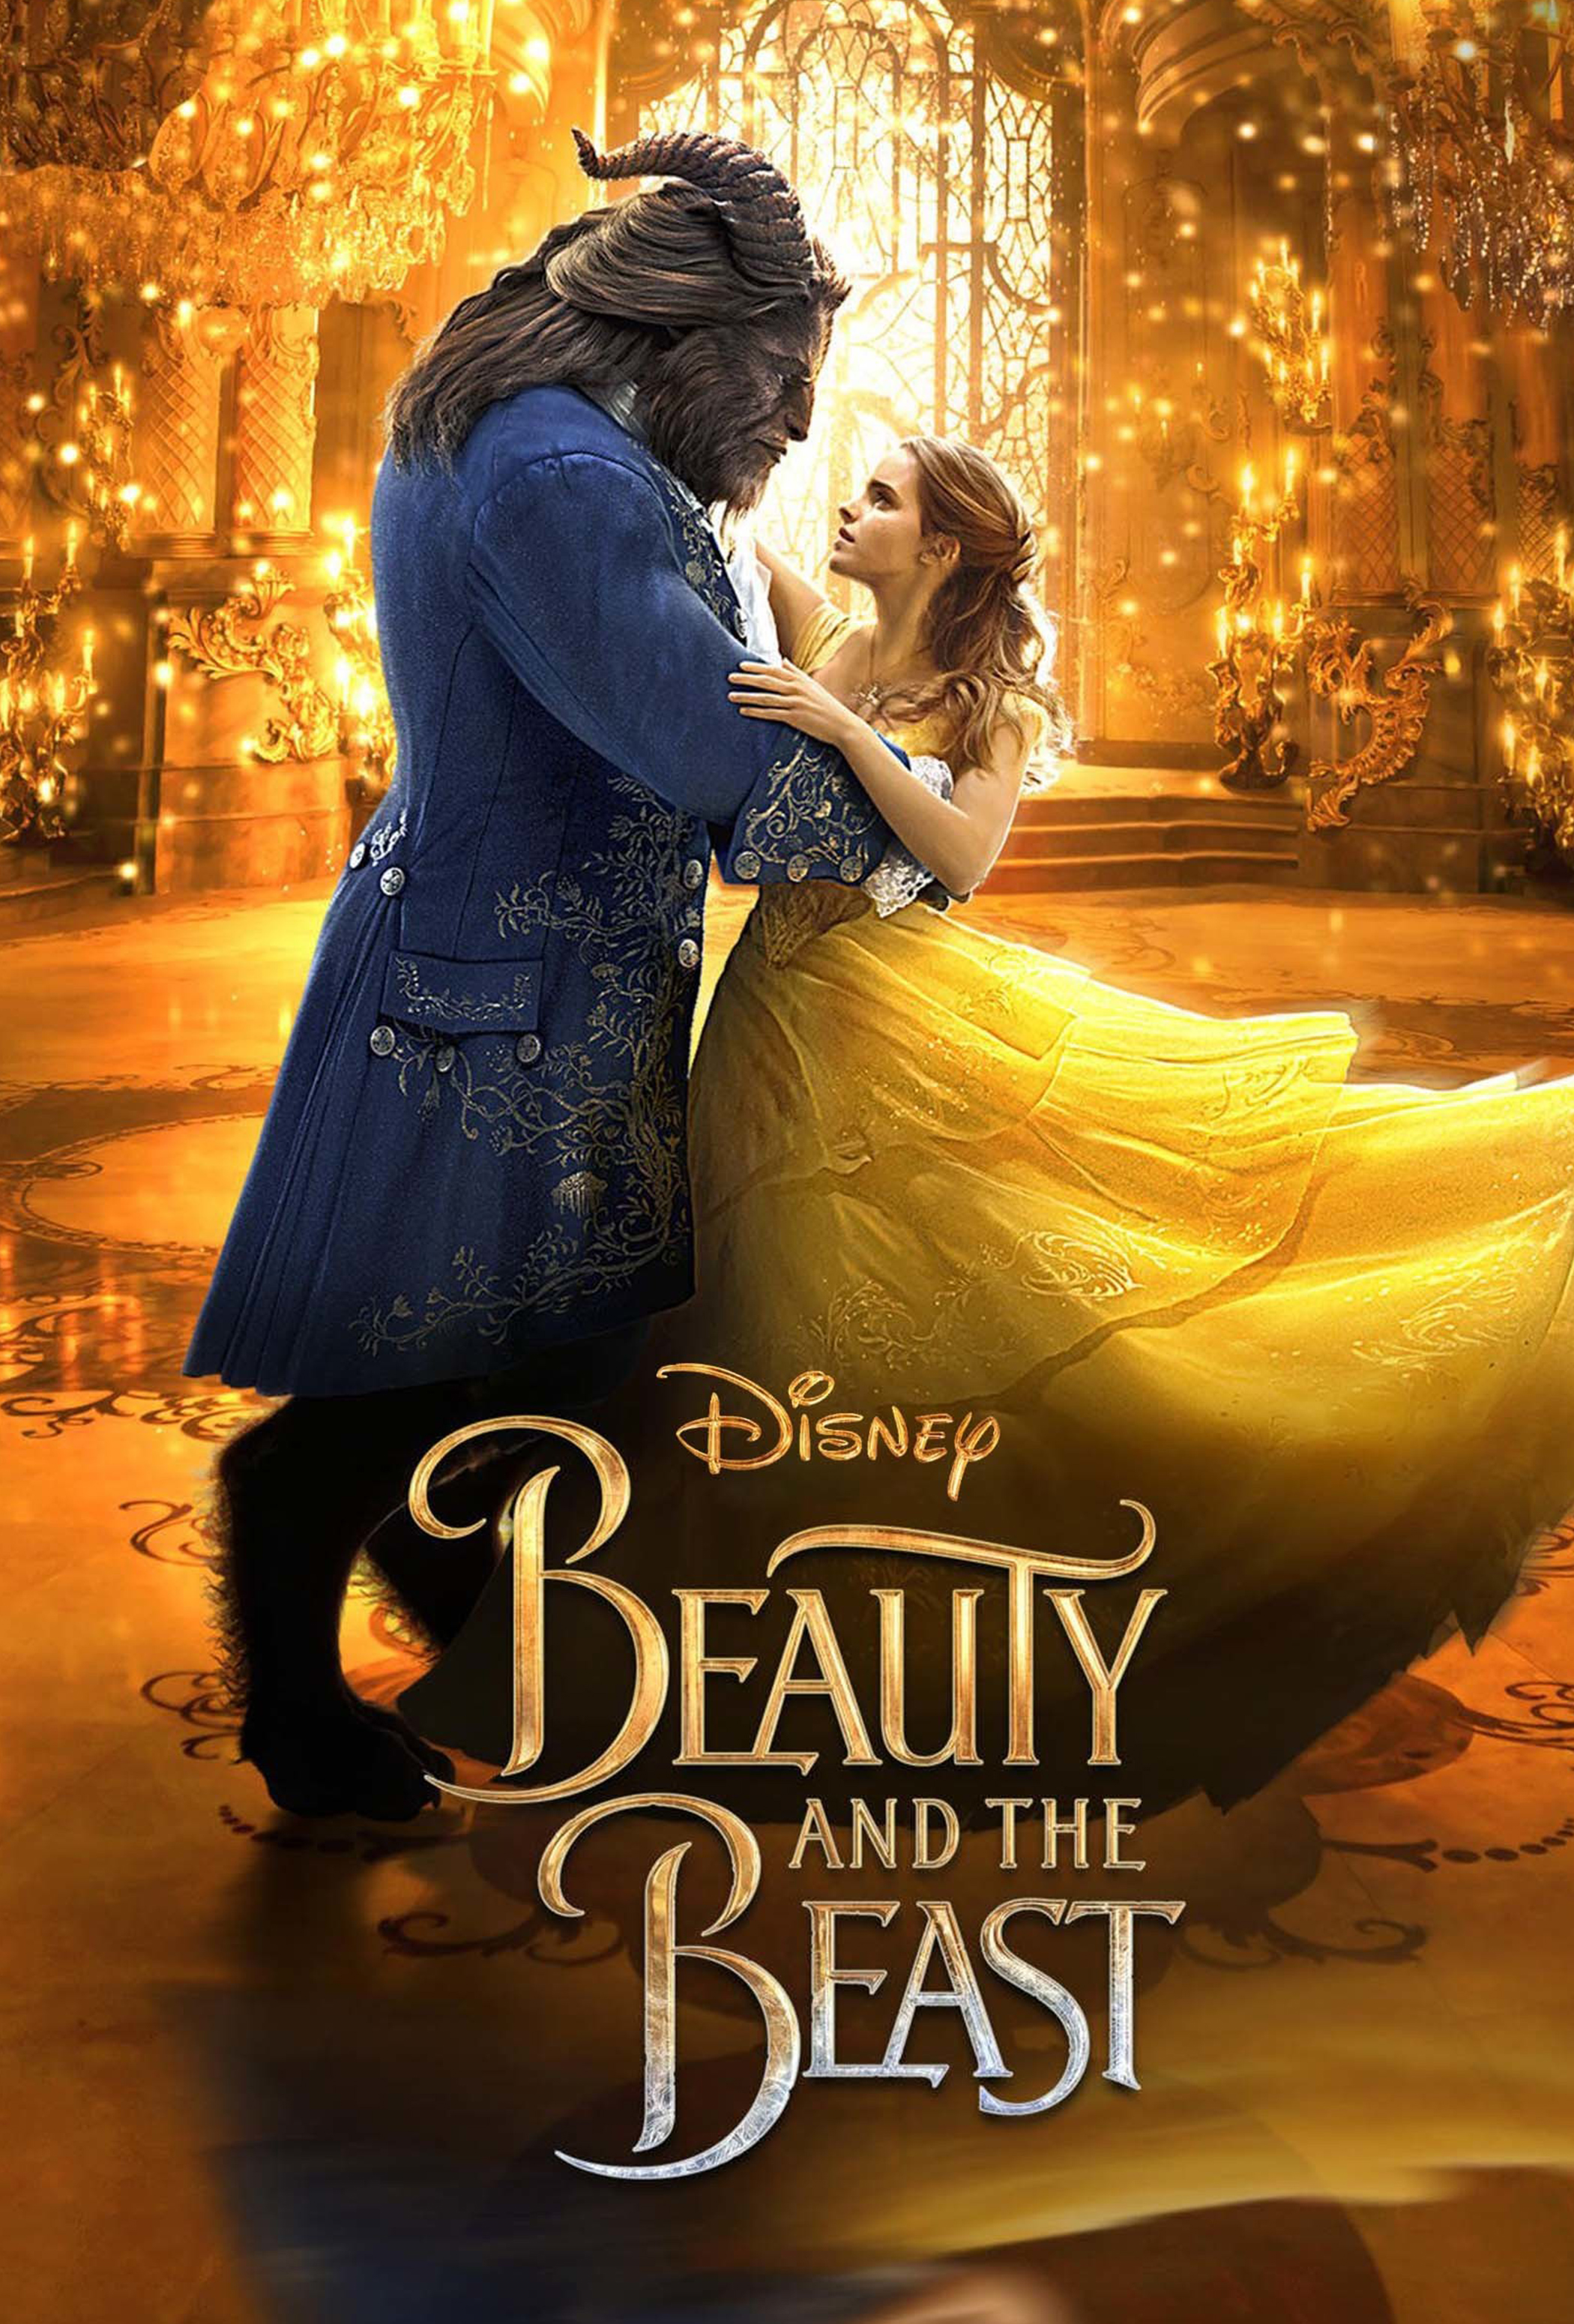 Beauty And The Beast (2017) Movie Poster - ID: 172821 ...